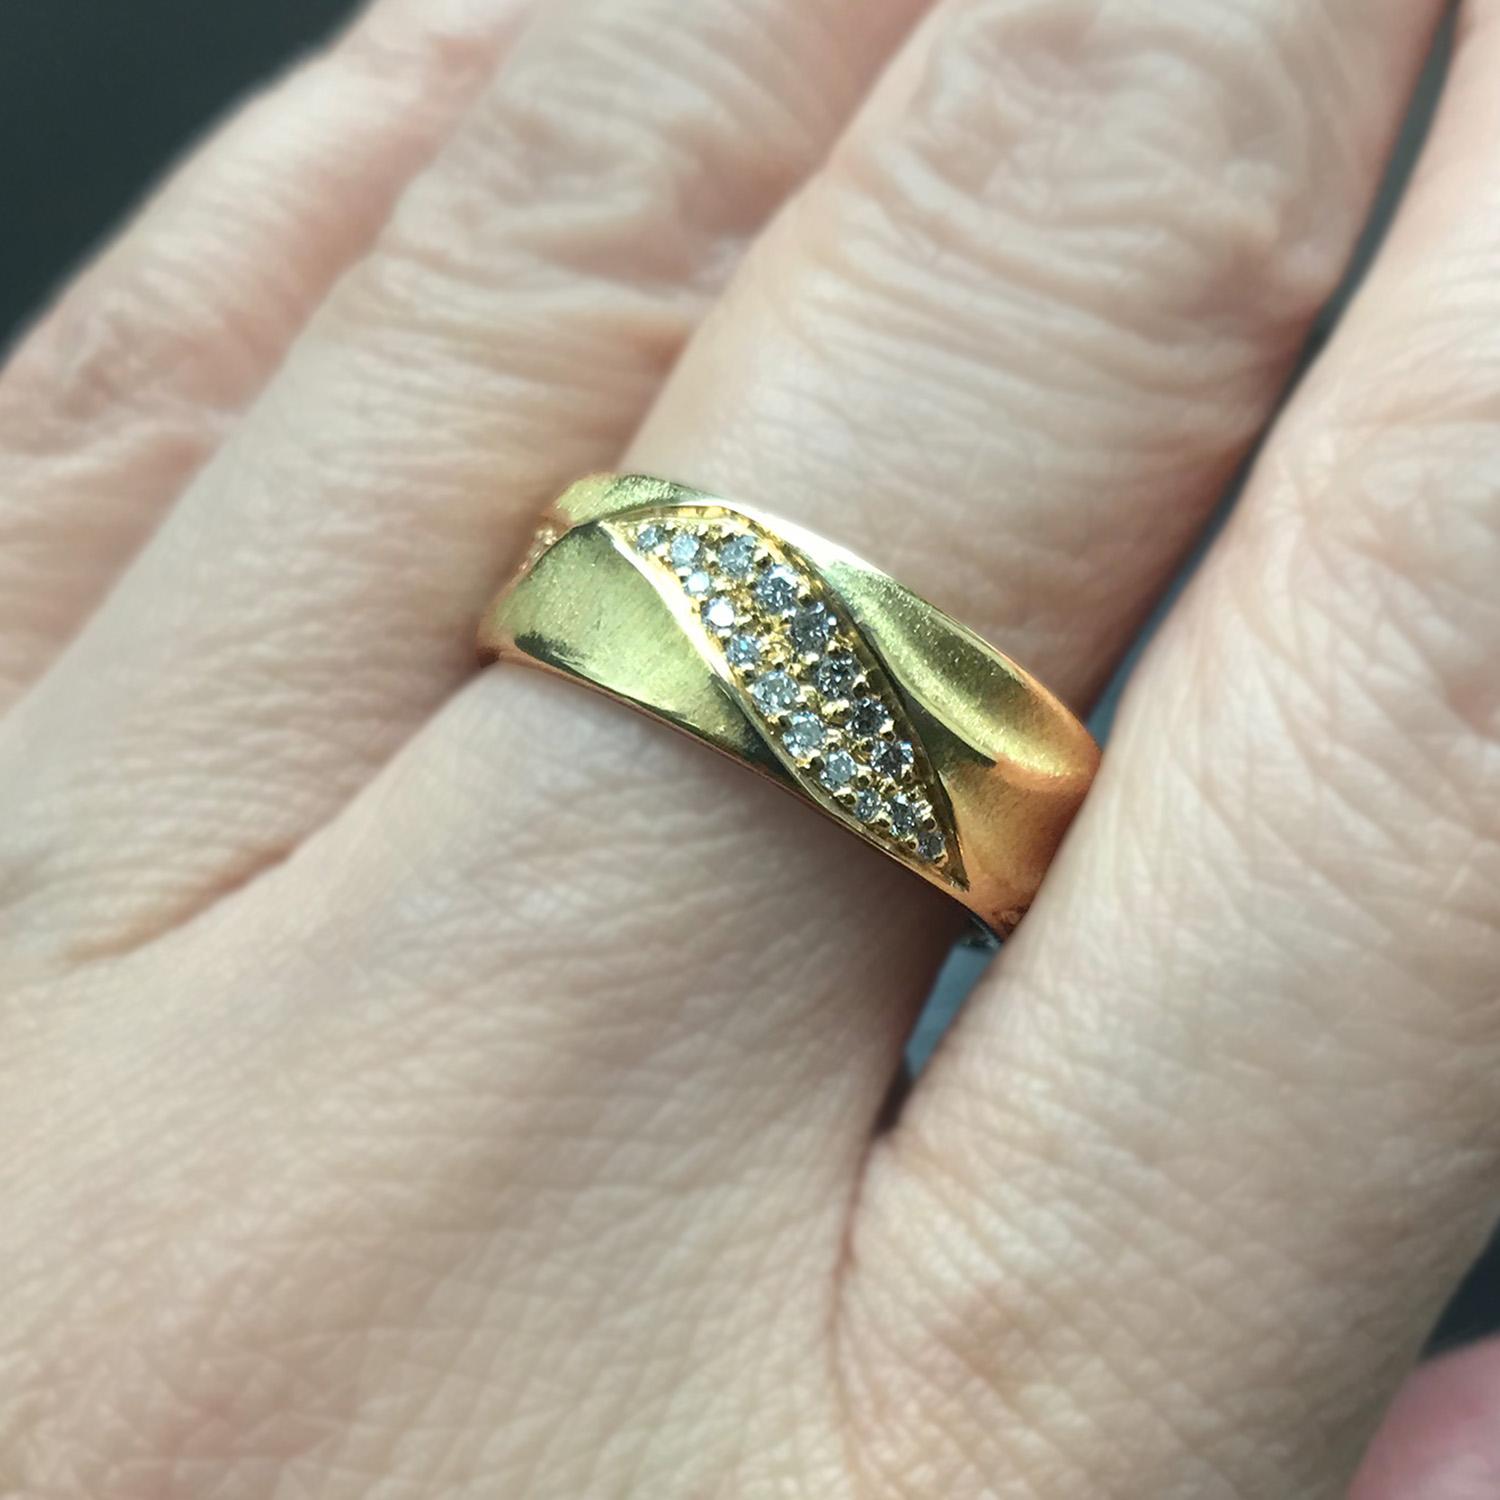 Diamonds (0.51ct total weight) wrap around K.Mita’s Eternal Dune Band in a twisting pattern accentuated by her “dune” texture that seemingly continues forever. The ring is made from 18k yellow gold and is 6.5mm wide. Handmade to order in 10-14 days.